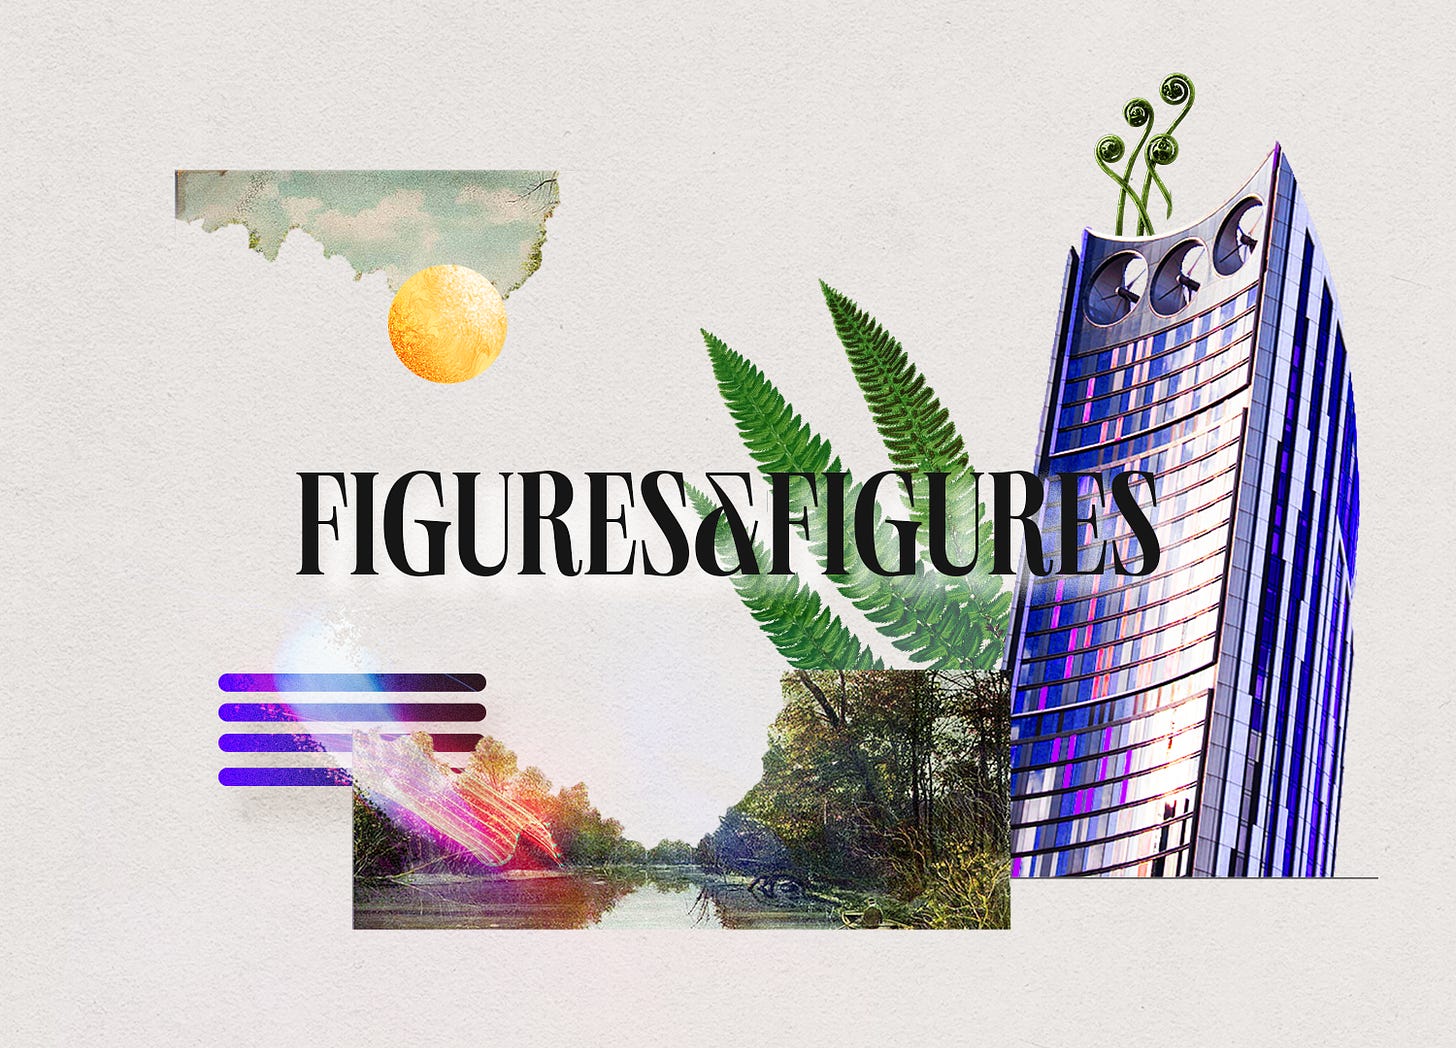 collage merging ultra modern elements like neon and glass building with vintage botanical imagery. On top, text reads Figures & Figures.